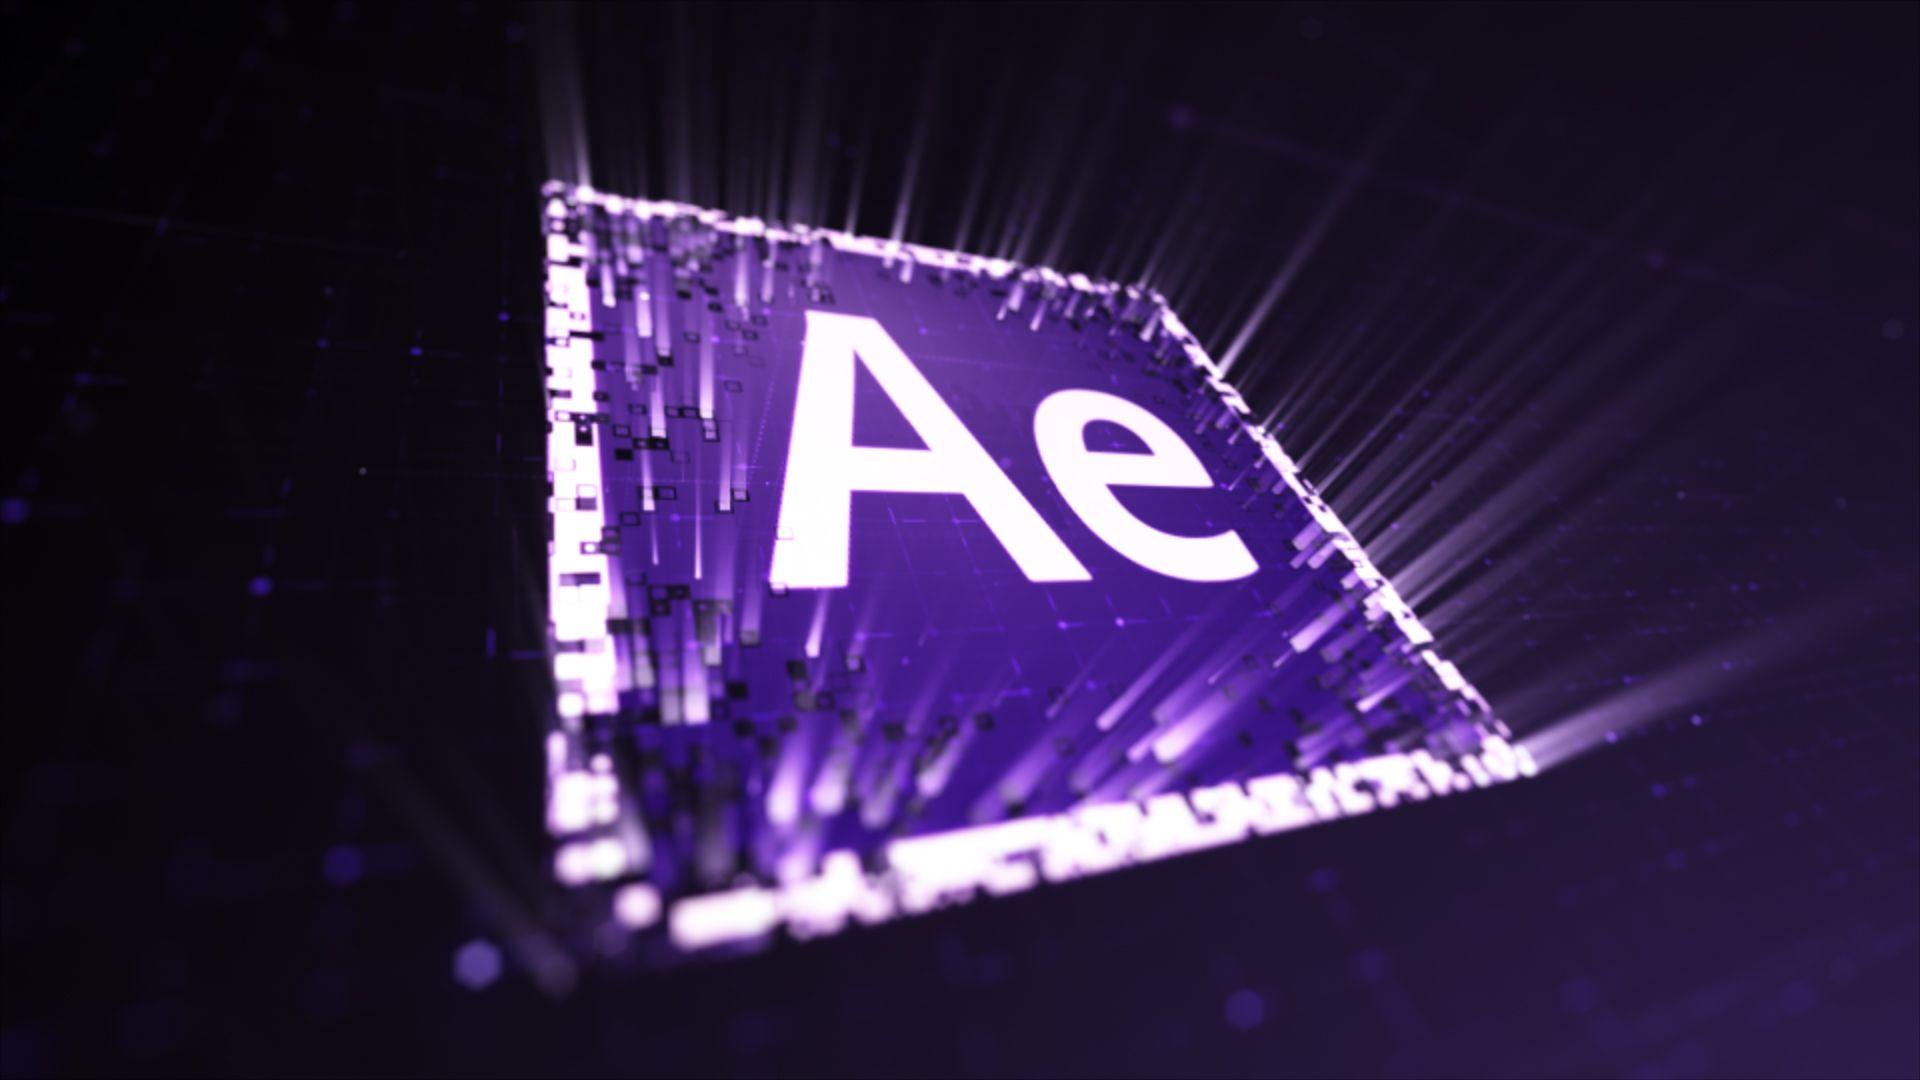 adobe after effects free download full version windows 10